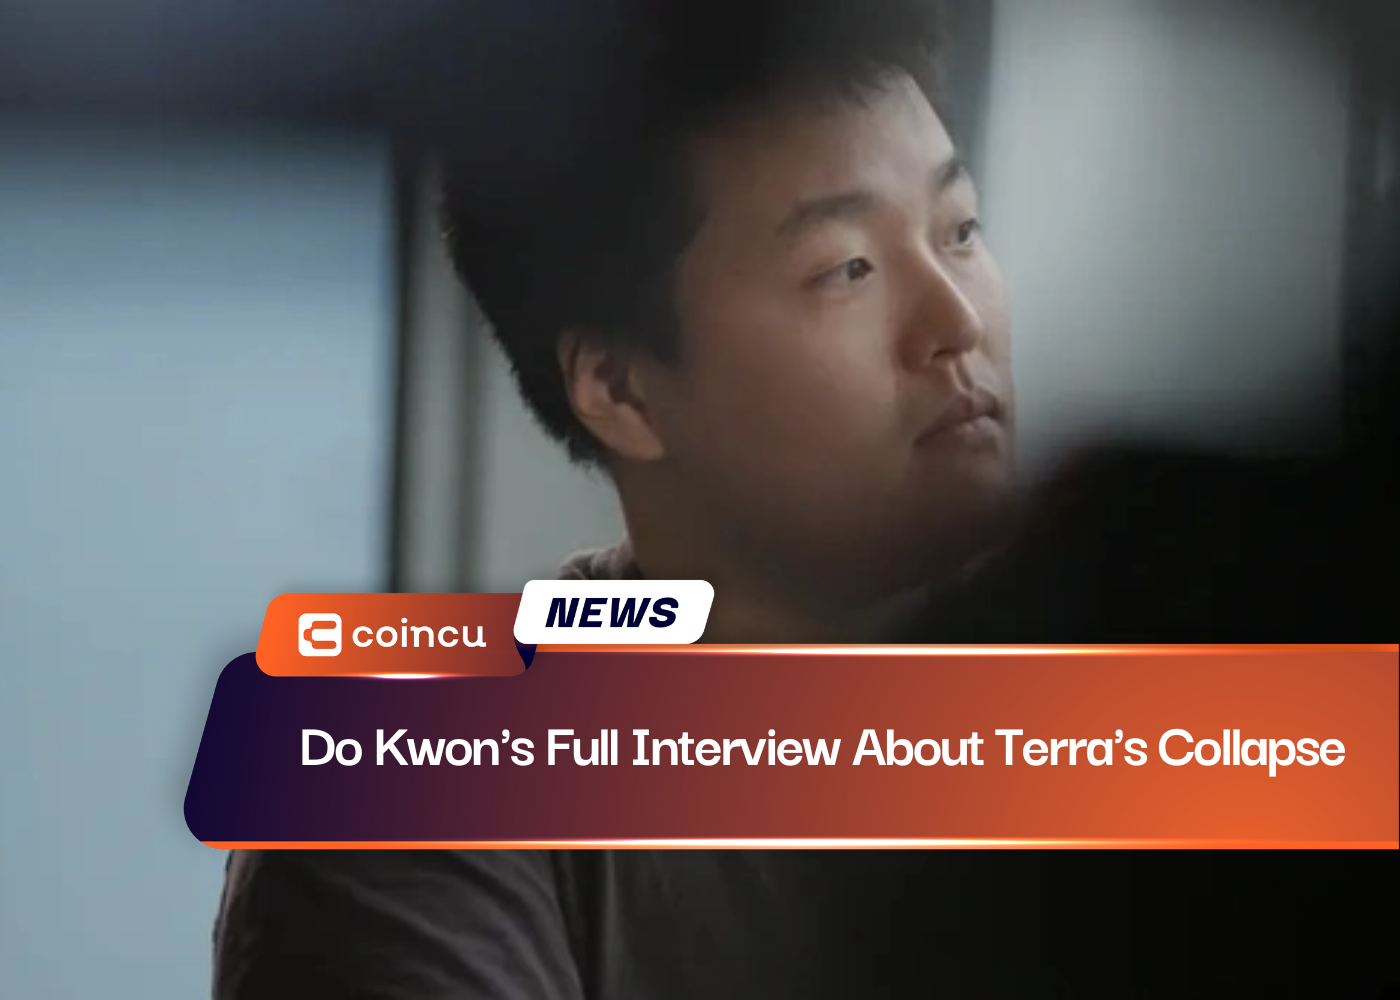 Do Kwon's Full Interview About Terra's Collapse